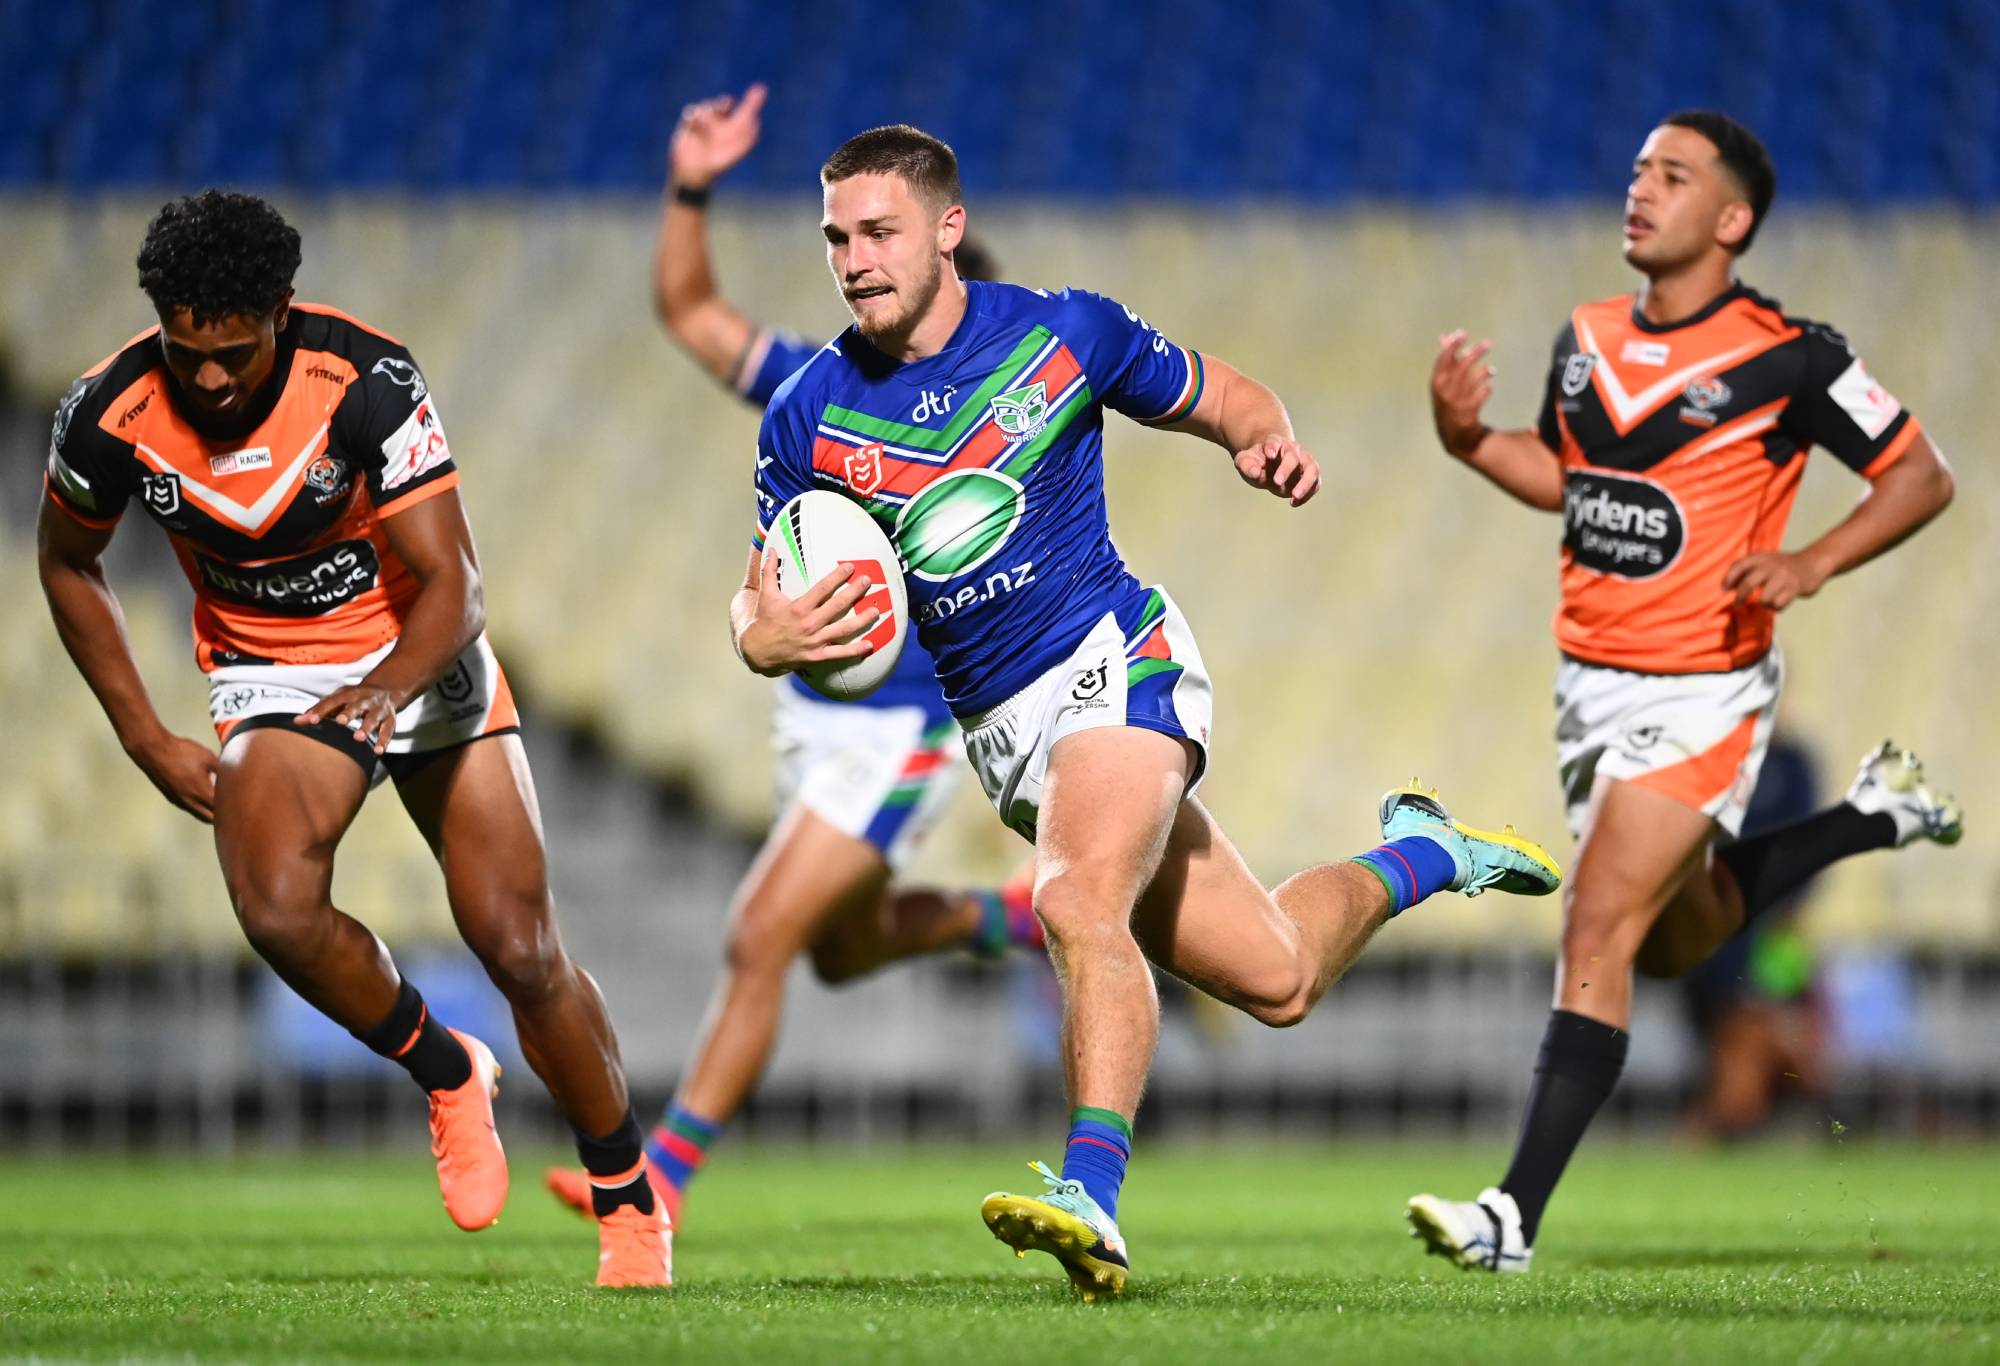 AUCKLAND, NEW ZEALAND - FEBRUARY 09: Luke Metcalf of the Warriors makes a break of the Tigers score a try during the NRL trial match between New Zealand Warriors and Wests Tigers at Mt Smart Stadium on February 09, 2023 in Auckland, New Zealand. (Photo by Hannah Peters/Getty Images)